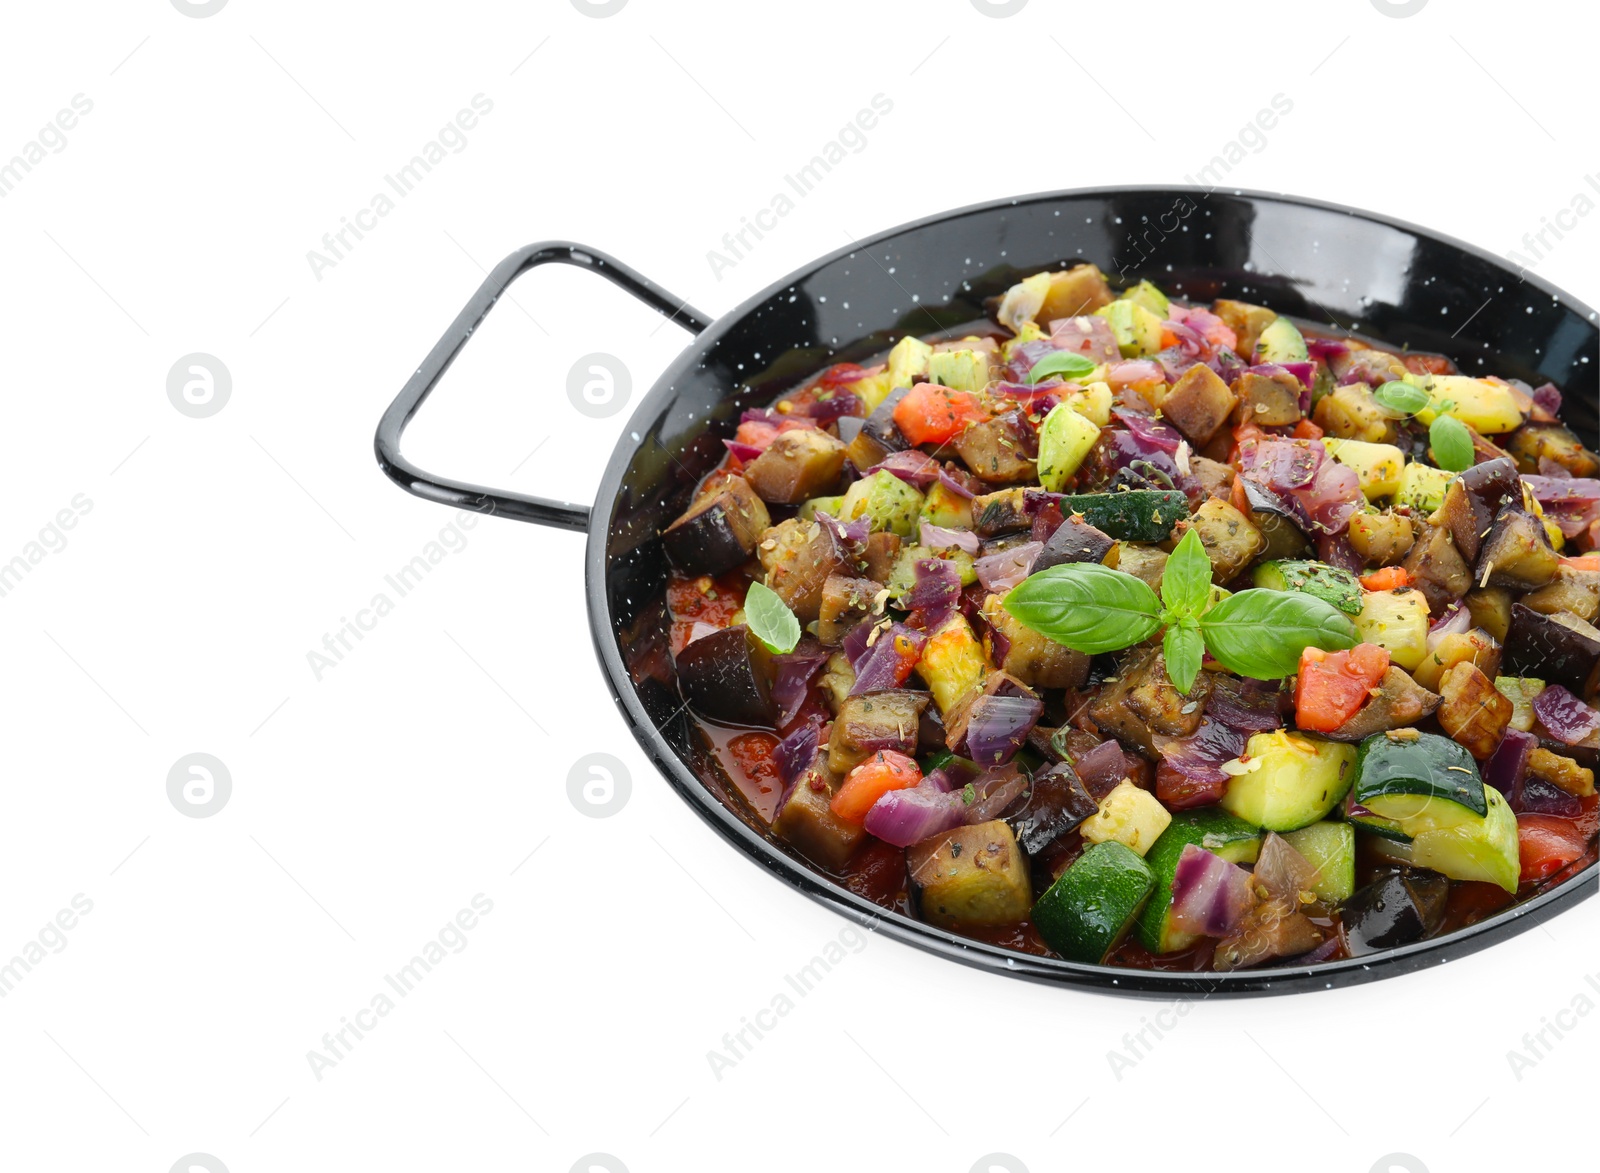 Photo of Delicious ratatouille in baking dish isolated on white